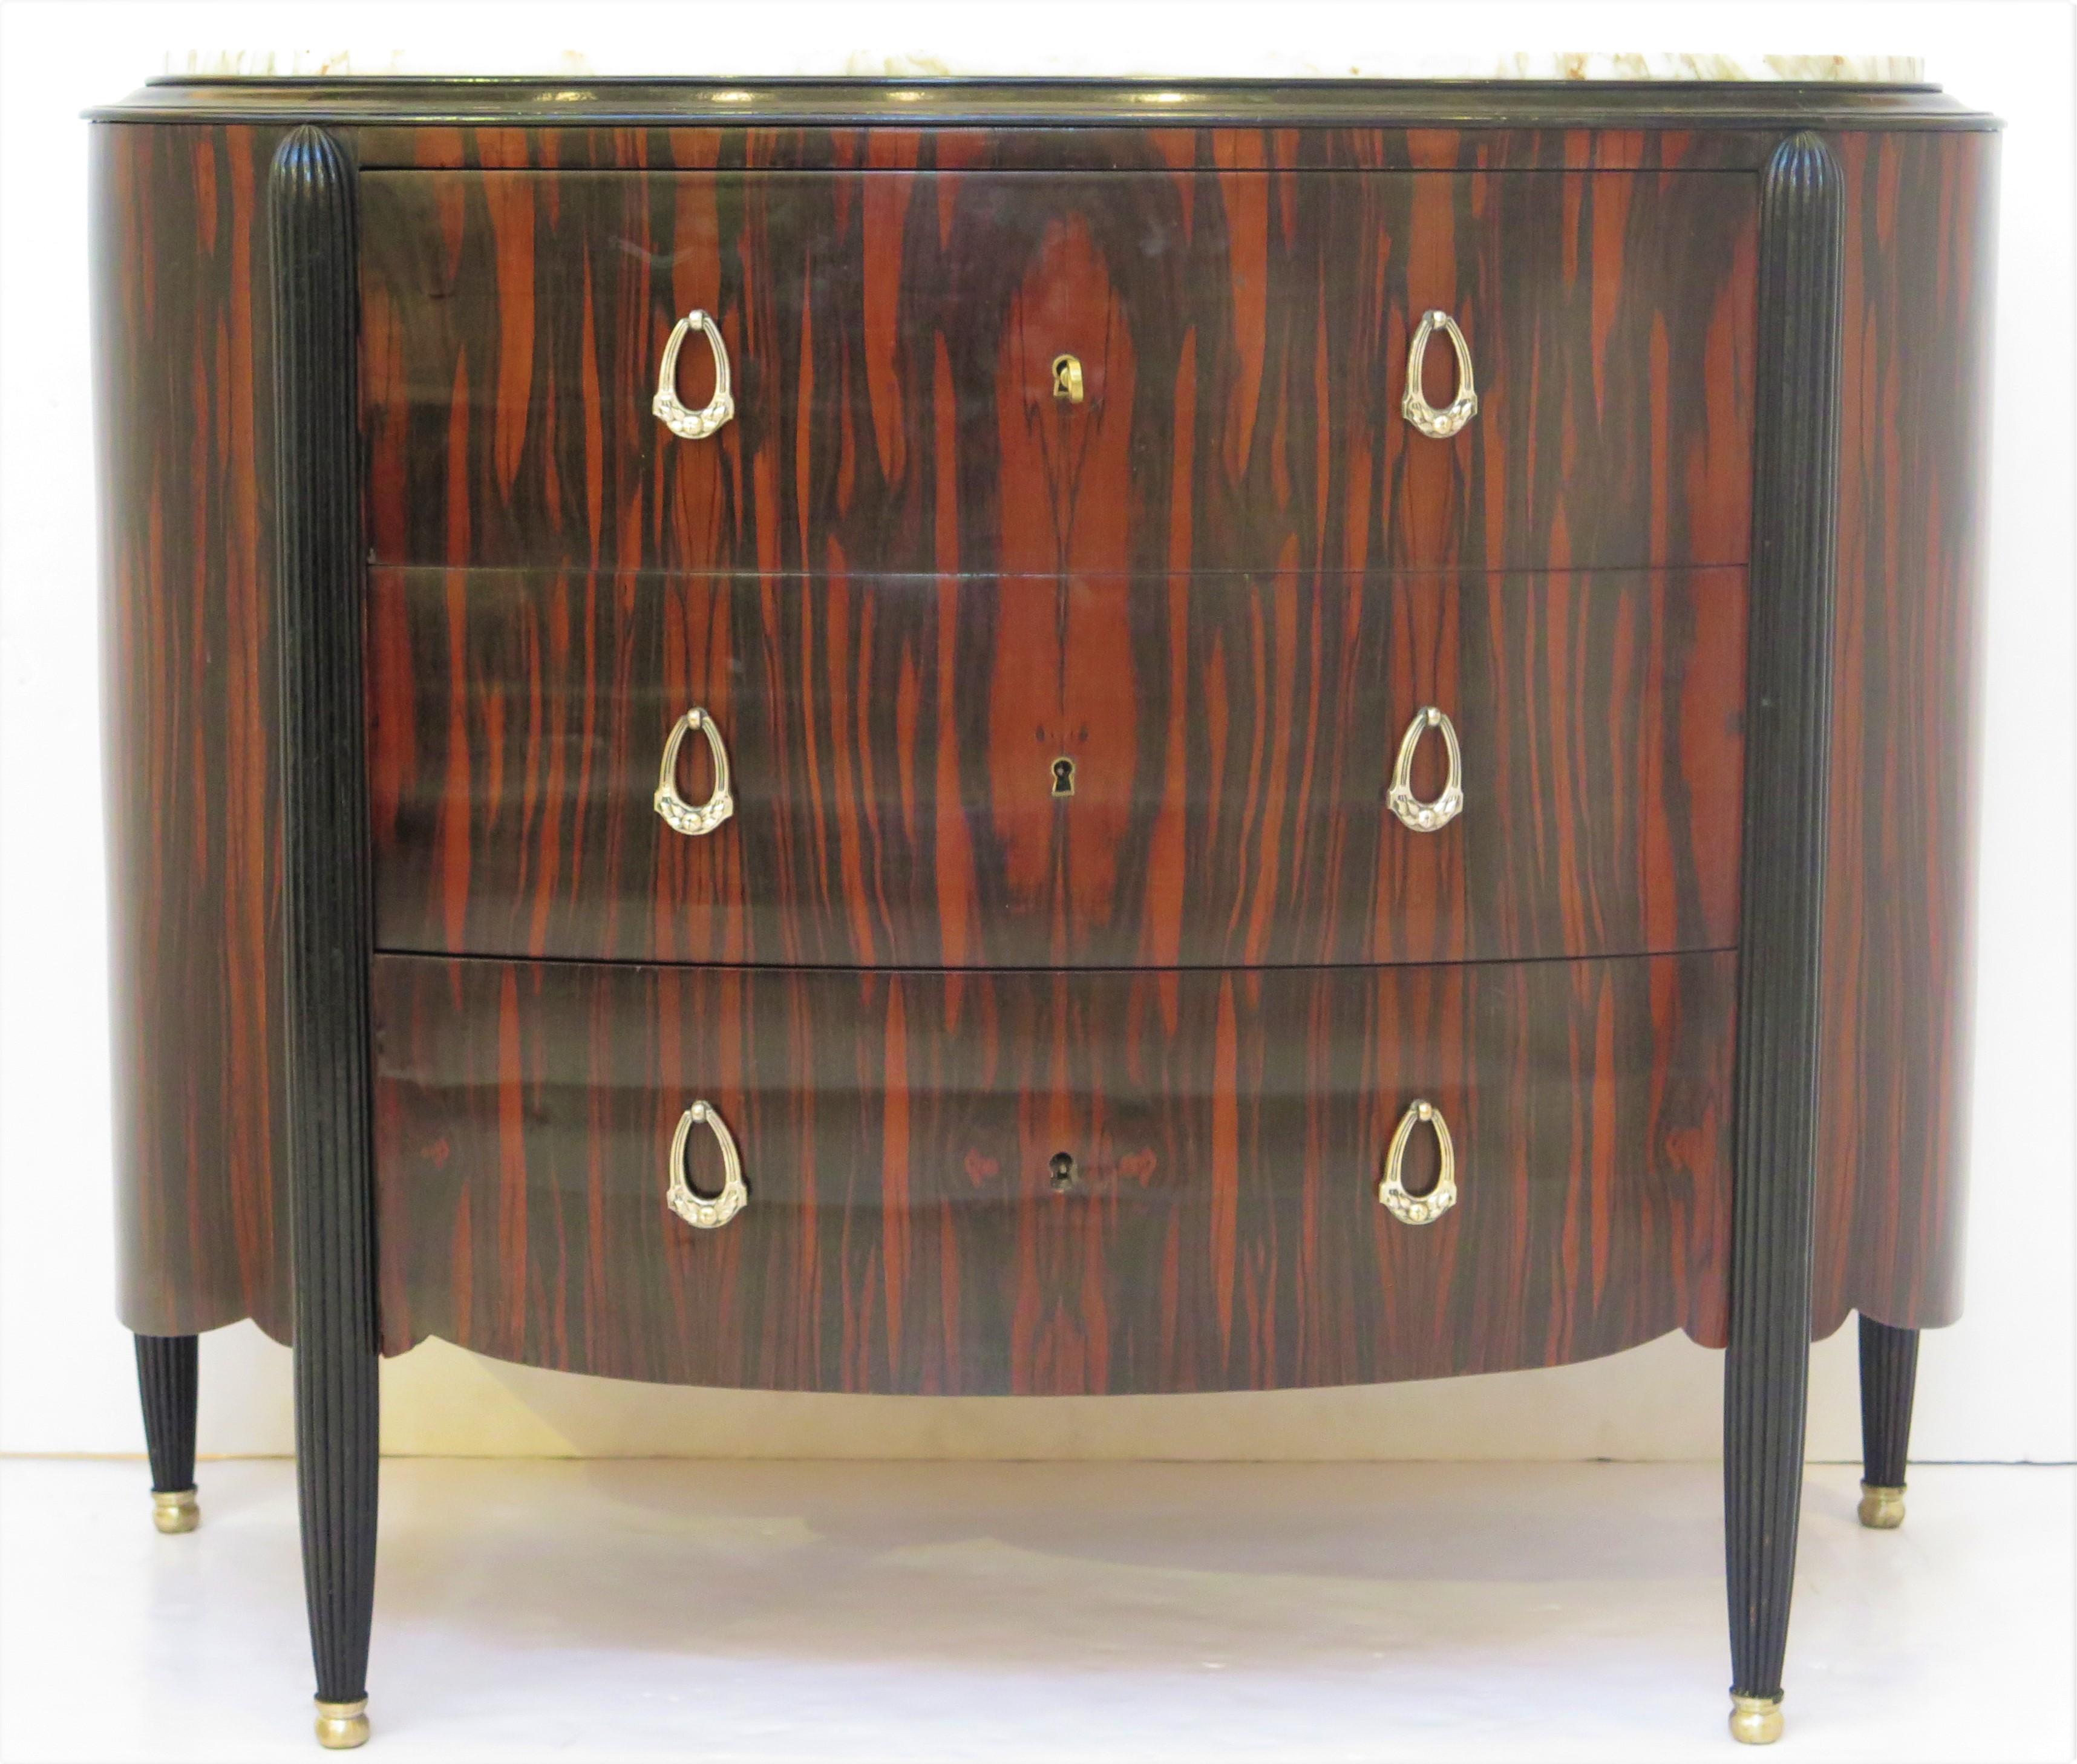 French art deco demilune commode, possibly macassar ebony, inset marble top, over tree drawers, rising on melon ribbed legs. 20th Century.